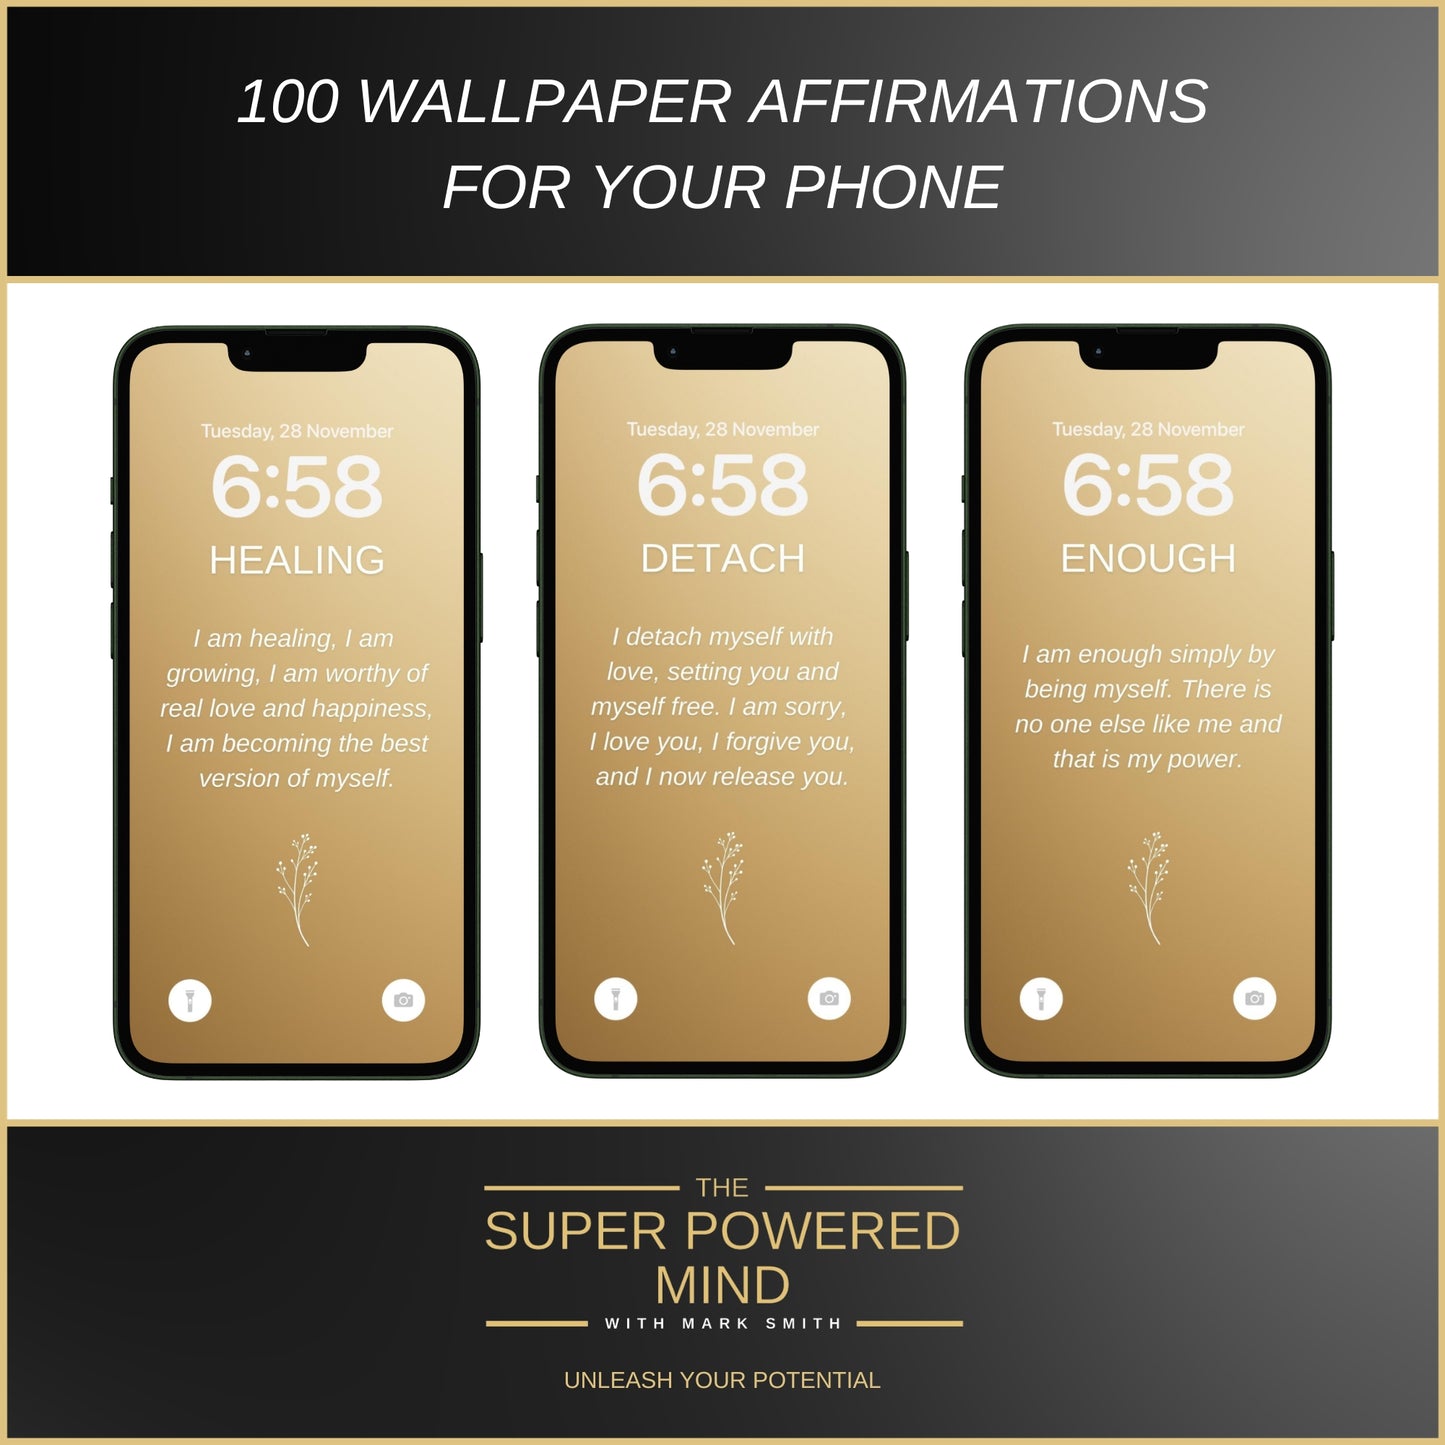 100 Affirmations Wallpapers For Your Phone - Gold Edition